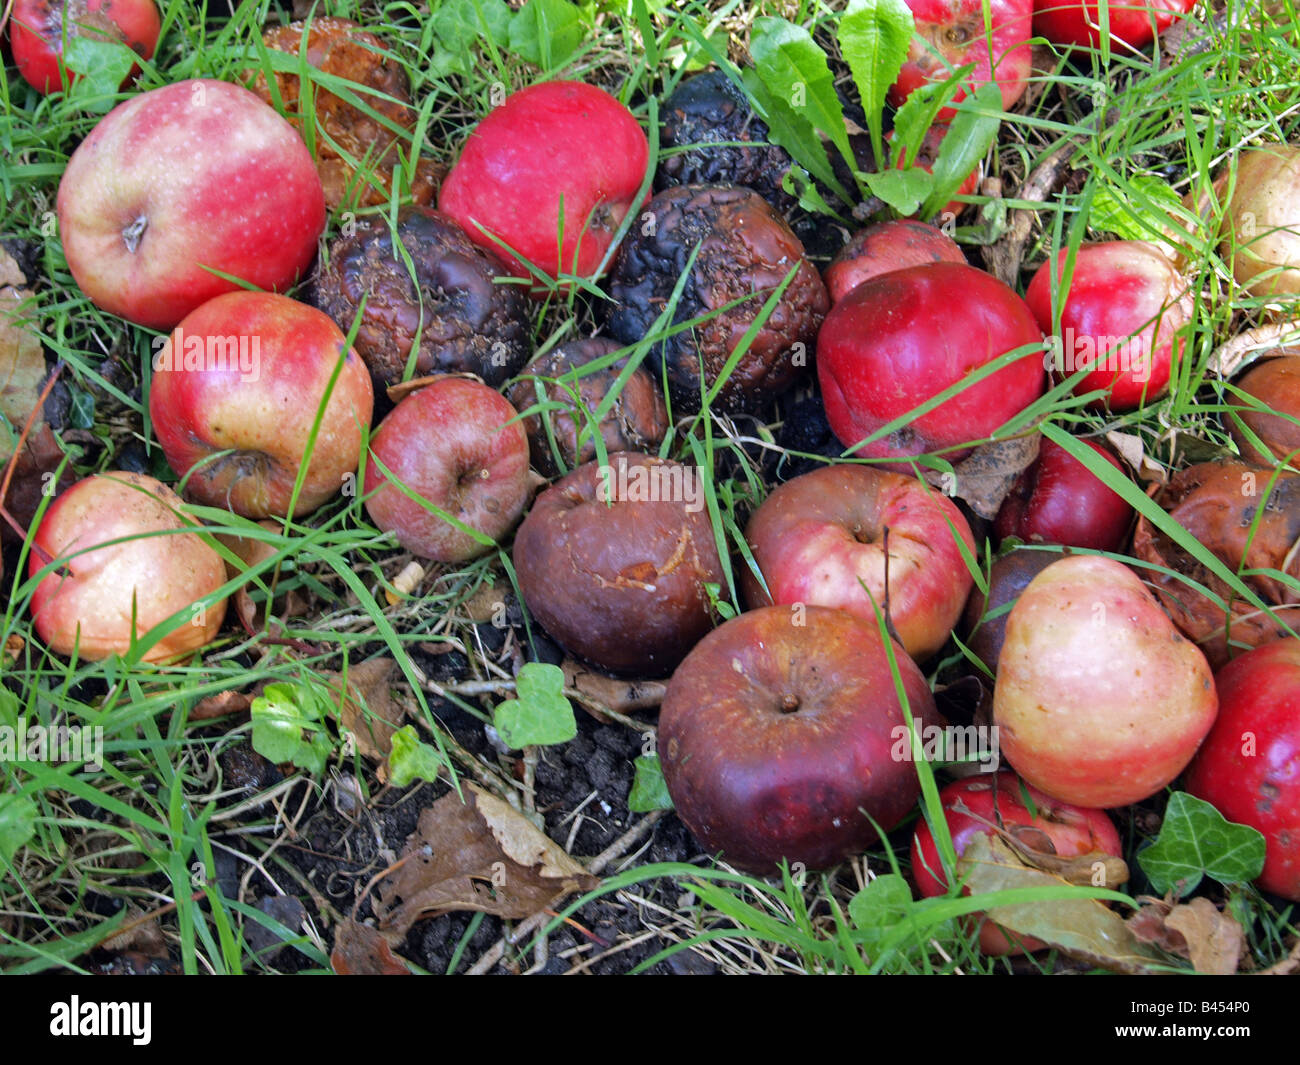 Apples on the ground Stock Photo